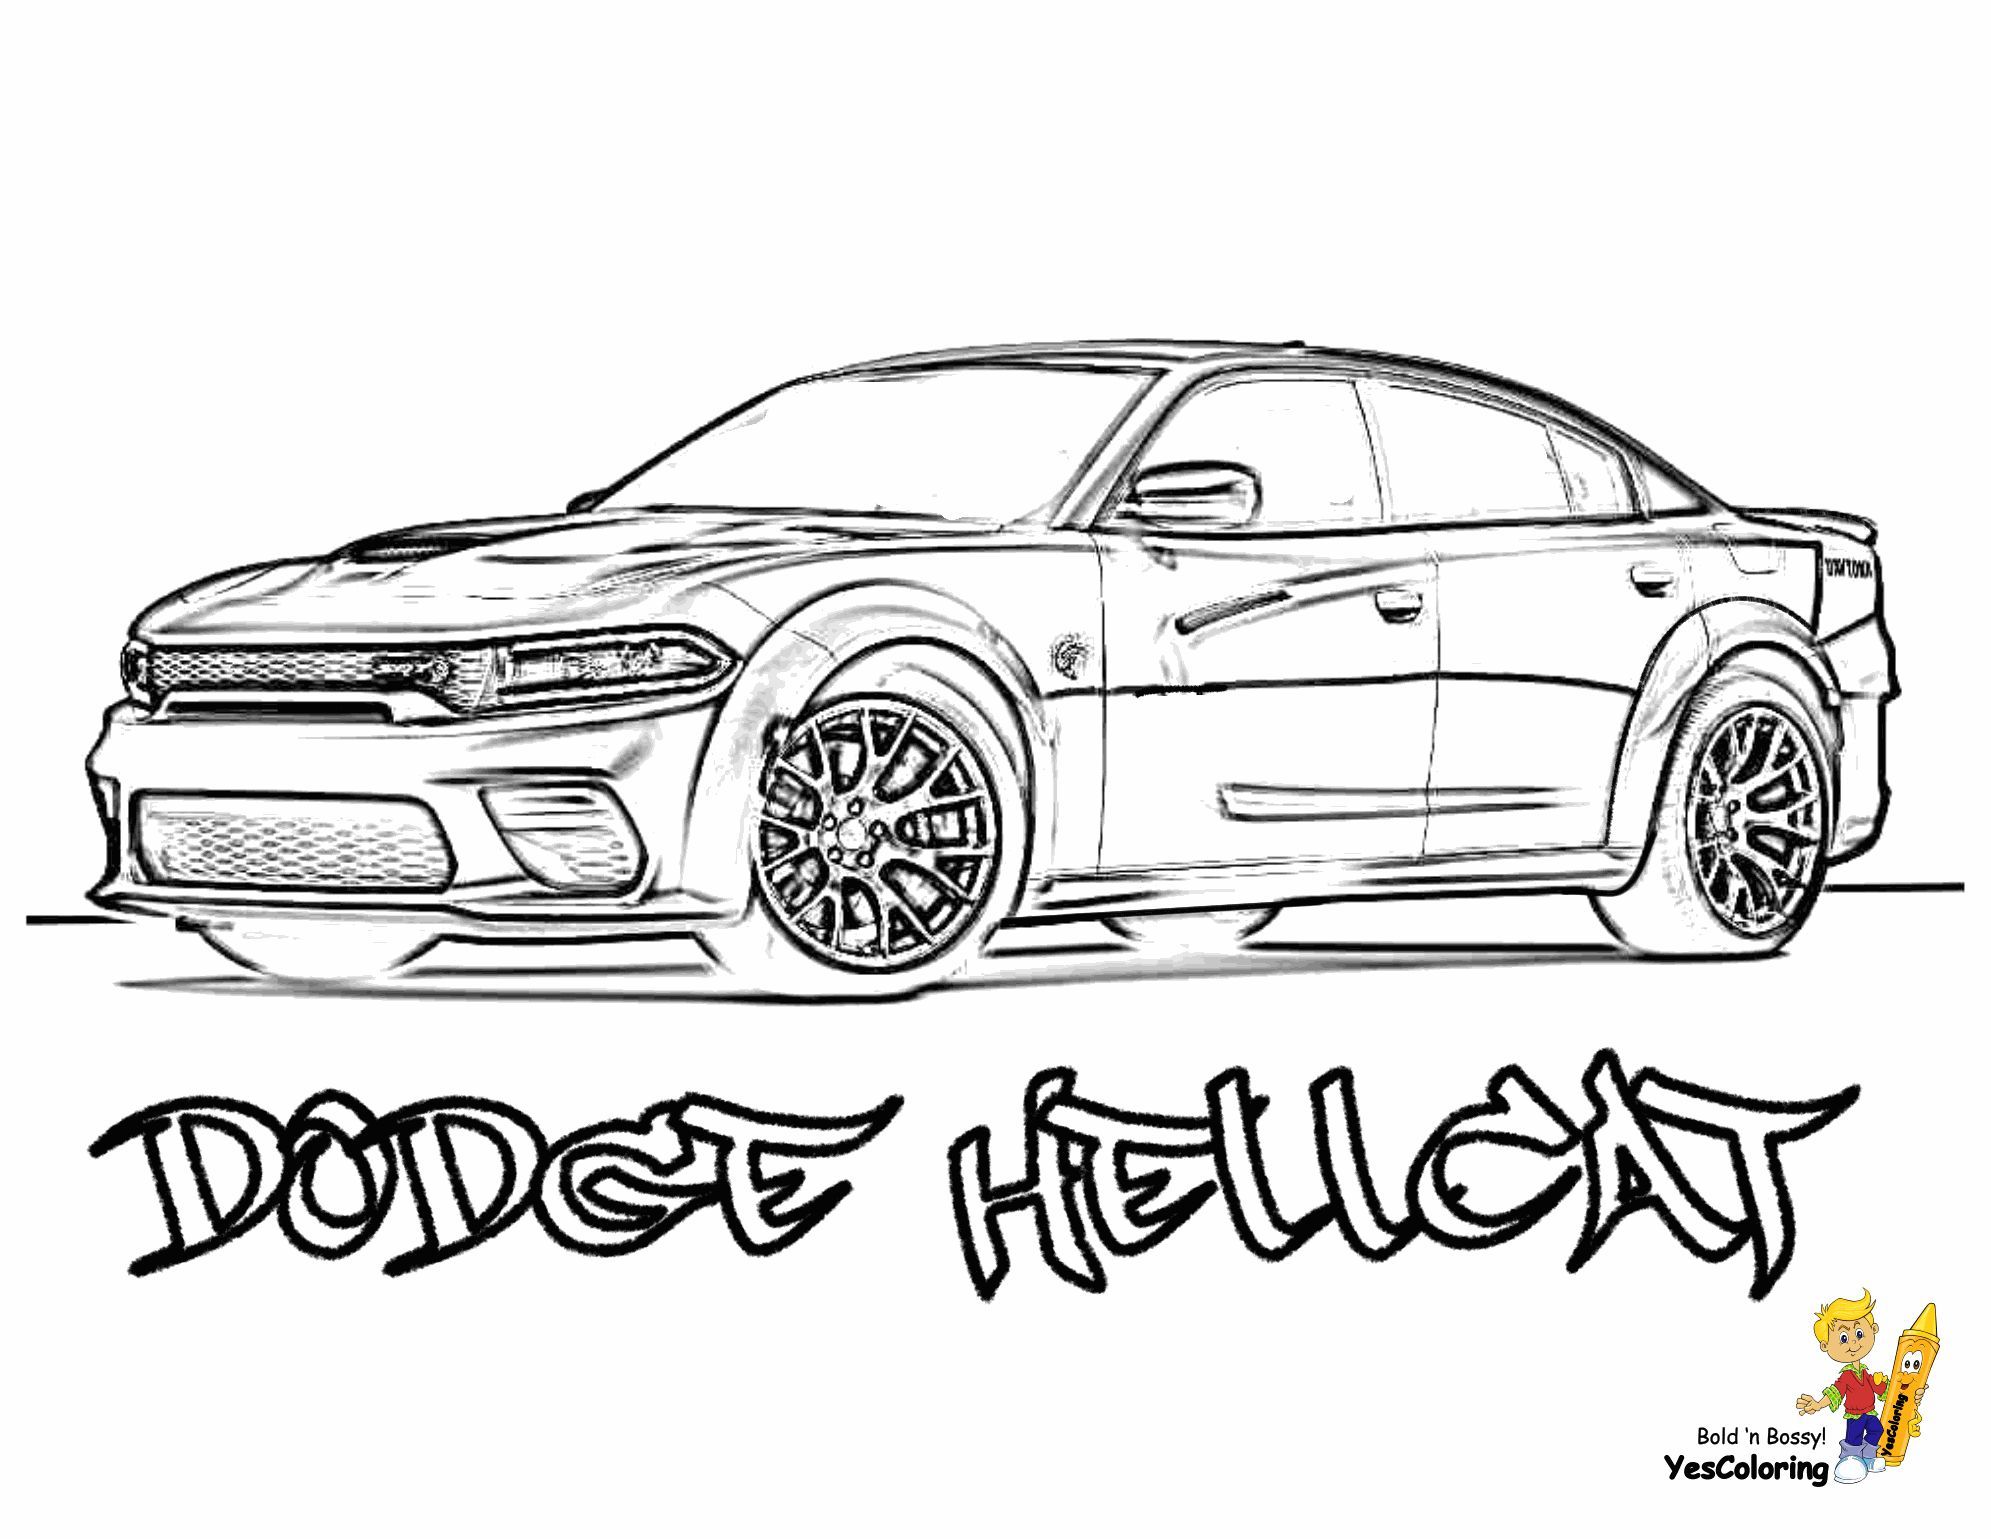 Print out this dodge car coloring page hellcat sweet httpswwwyescoloringcoolcarcolorinâ dodge charger hellcat cars coloring pages dodge charger